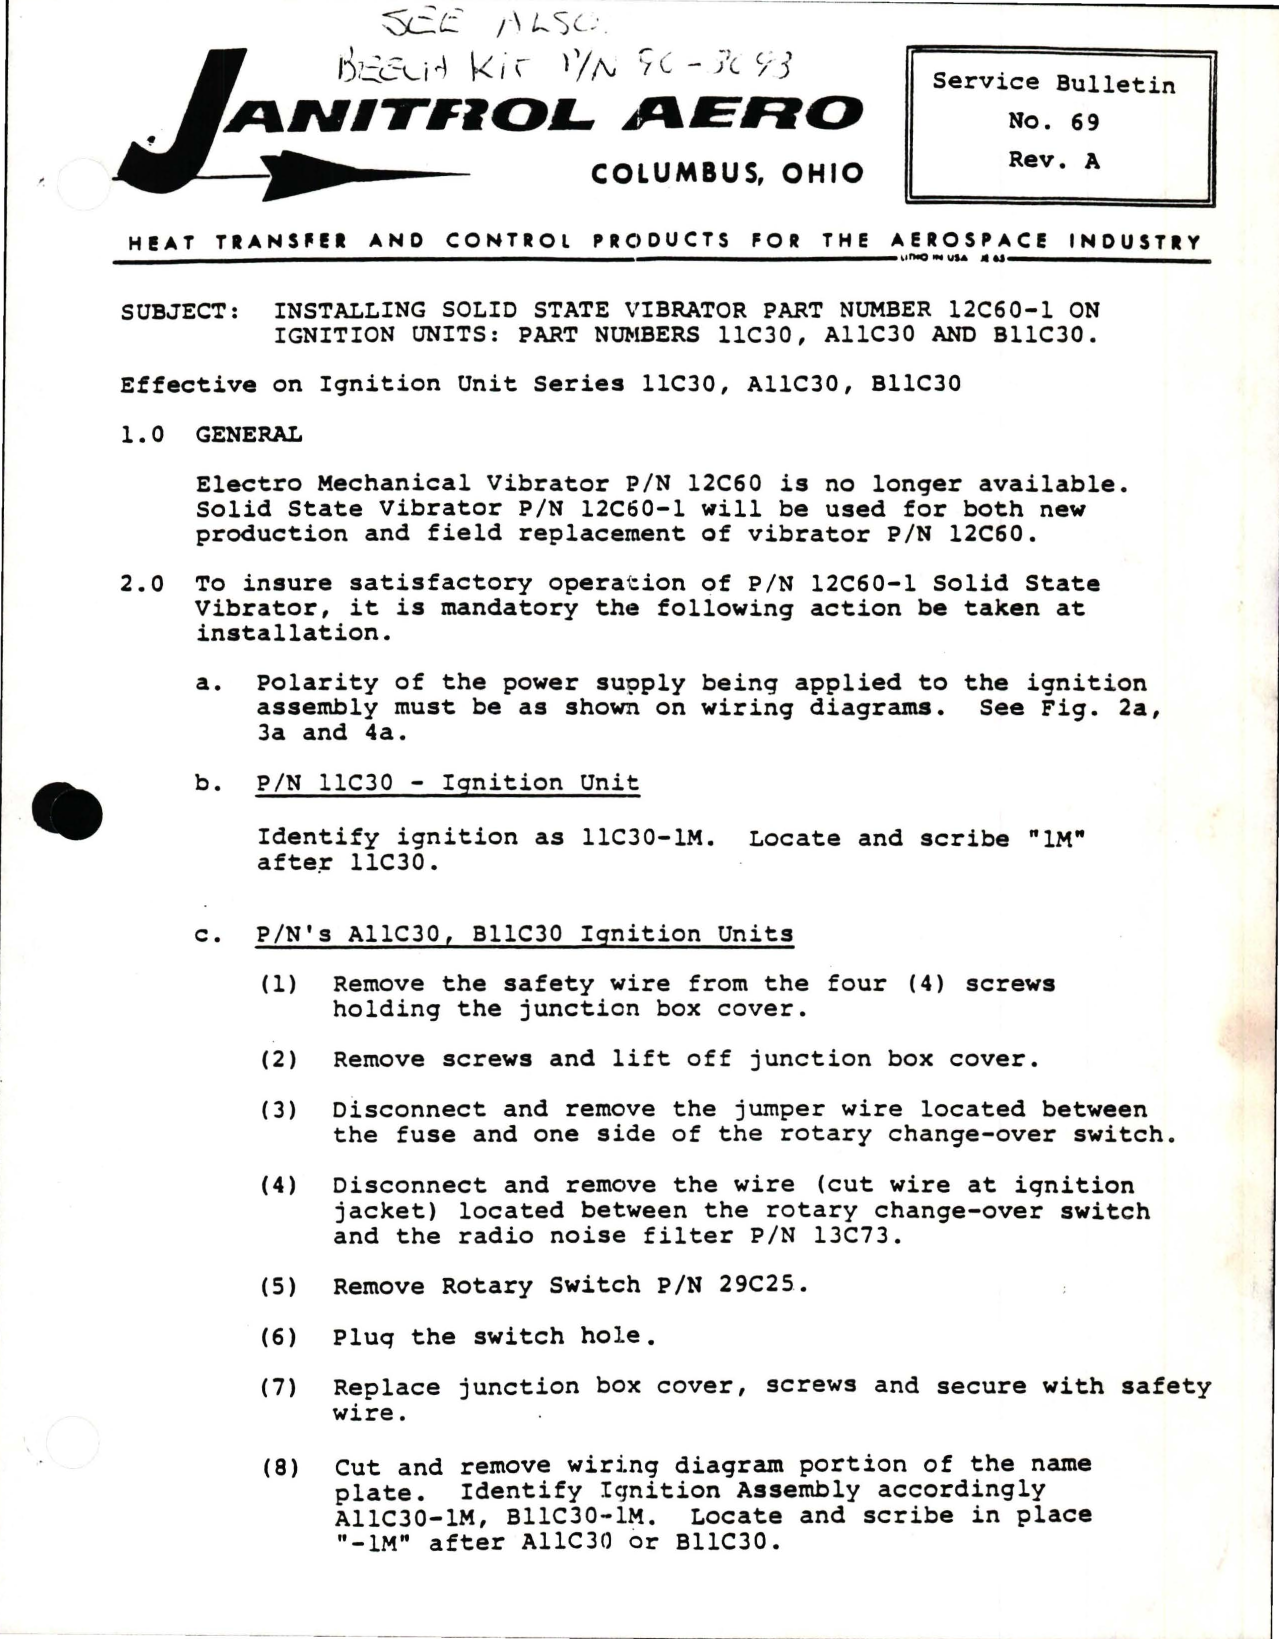 Sample page 1 from AirCorps Library document: Installing Solid State Vibrator Part 12C60-1 in Ignition Units